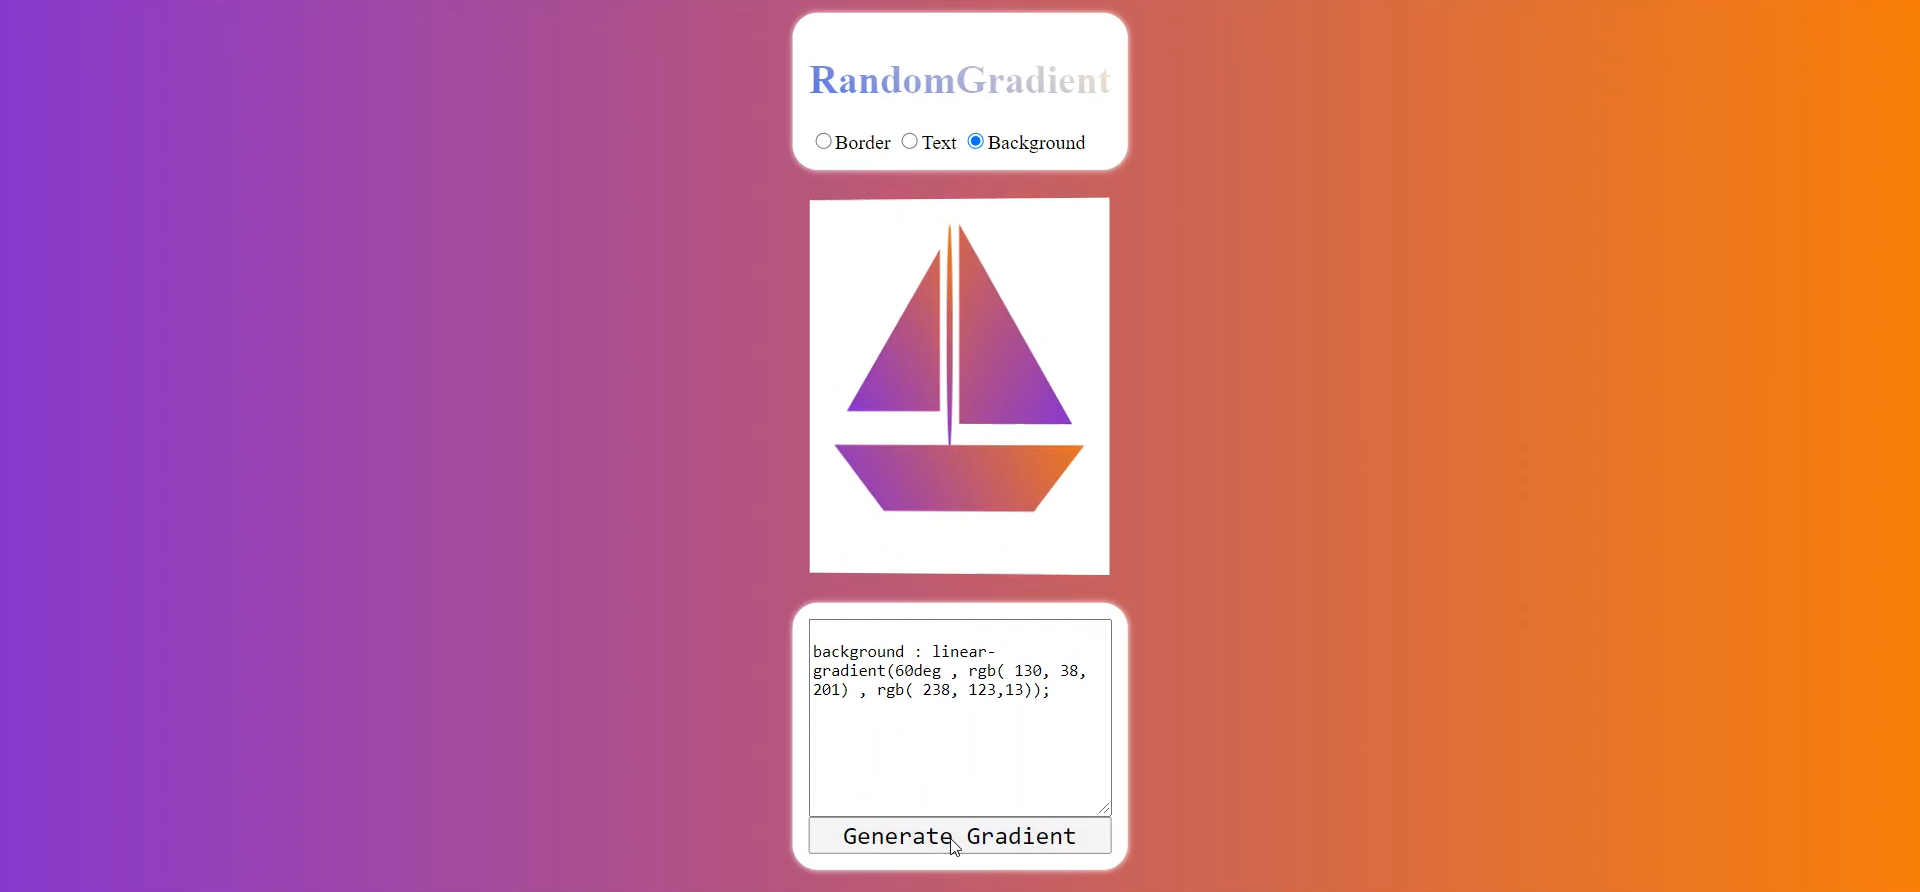 a random gradient generator for text, background and border